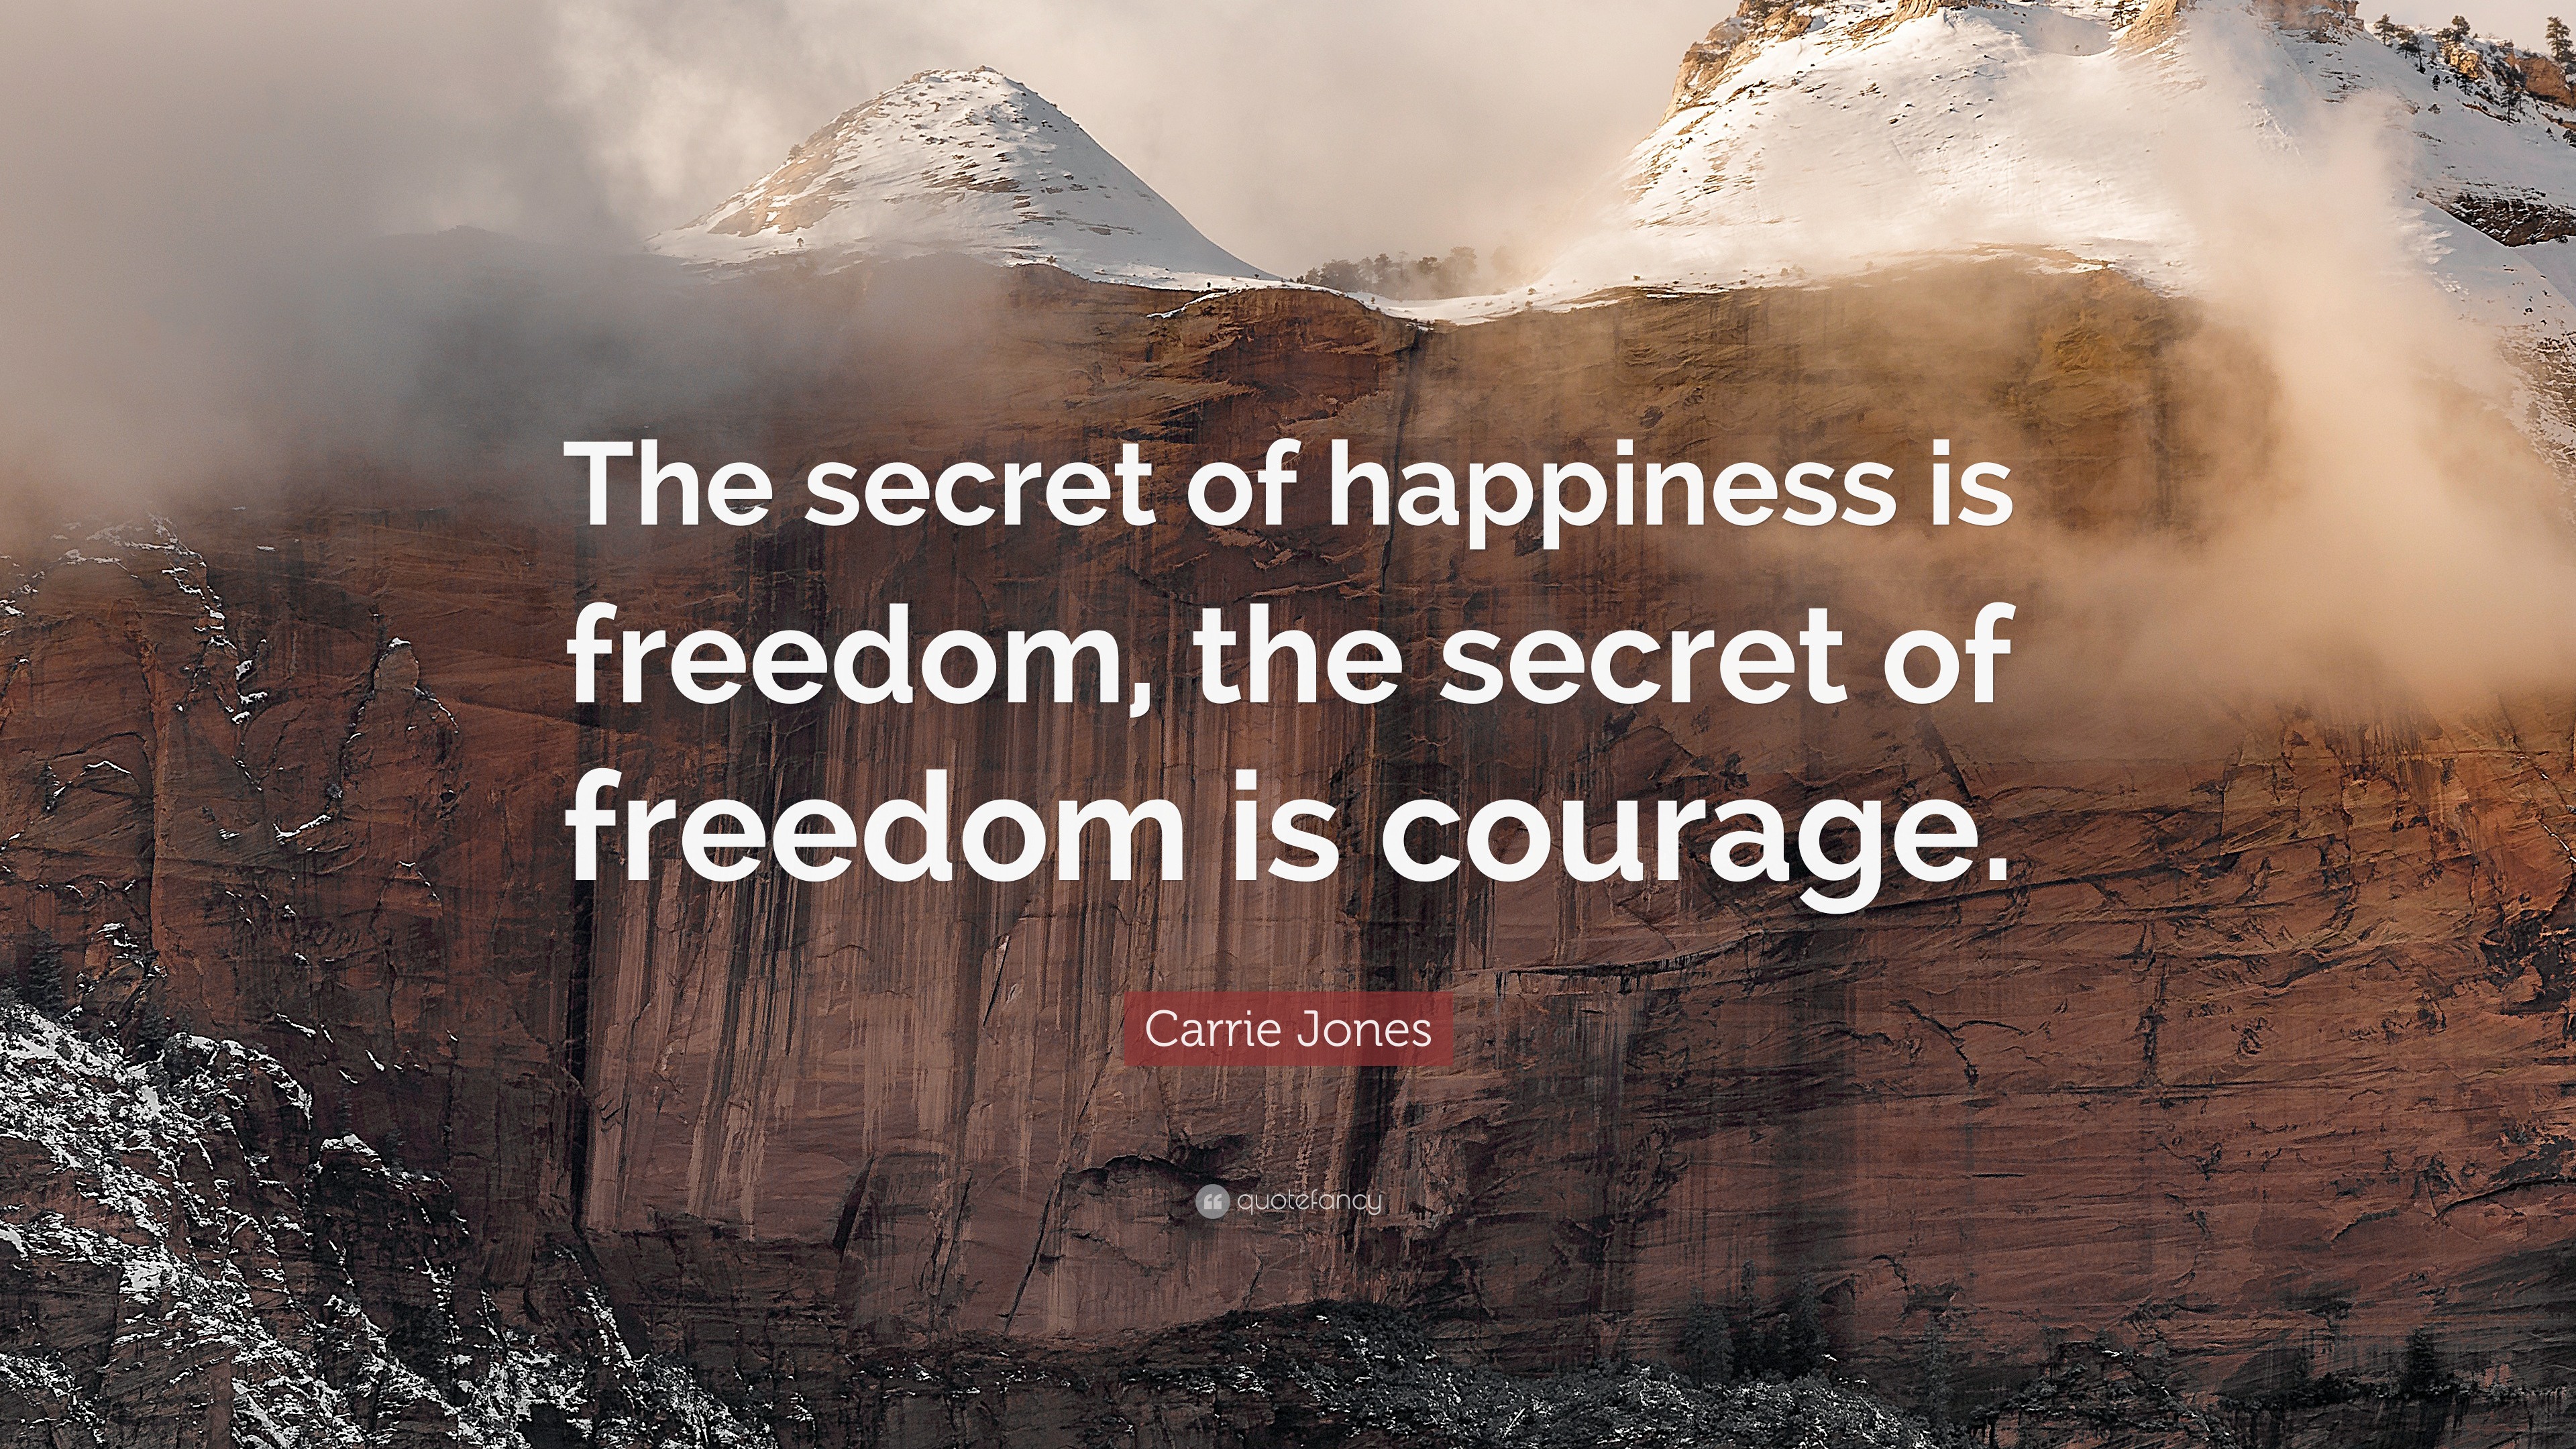 Carrie Jones Quote: “The secret of happiness is freedom, the secret of